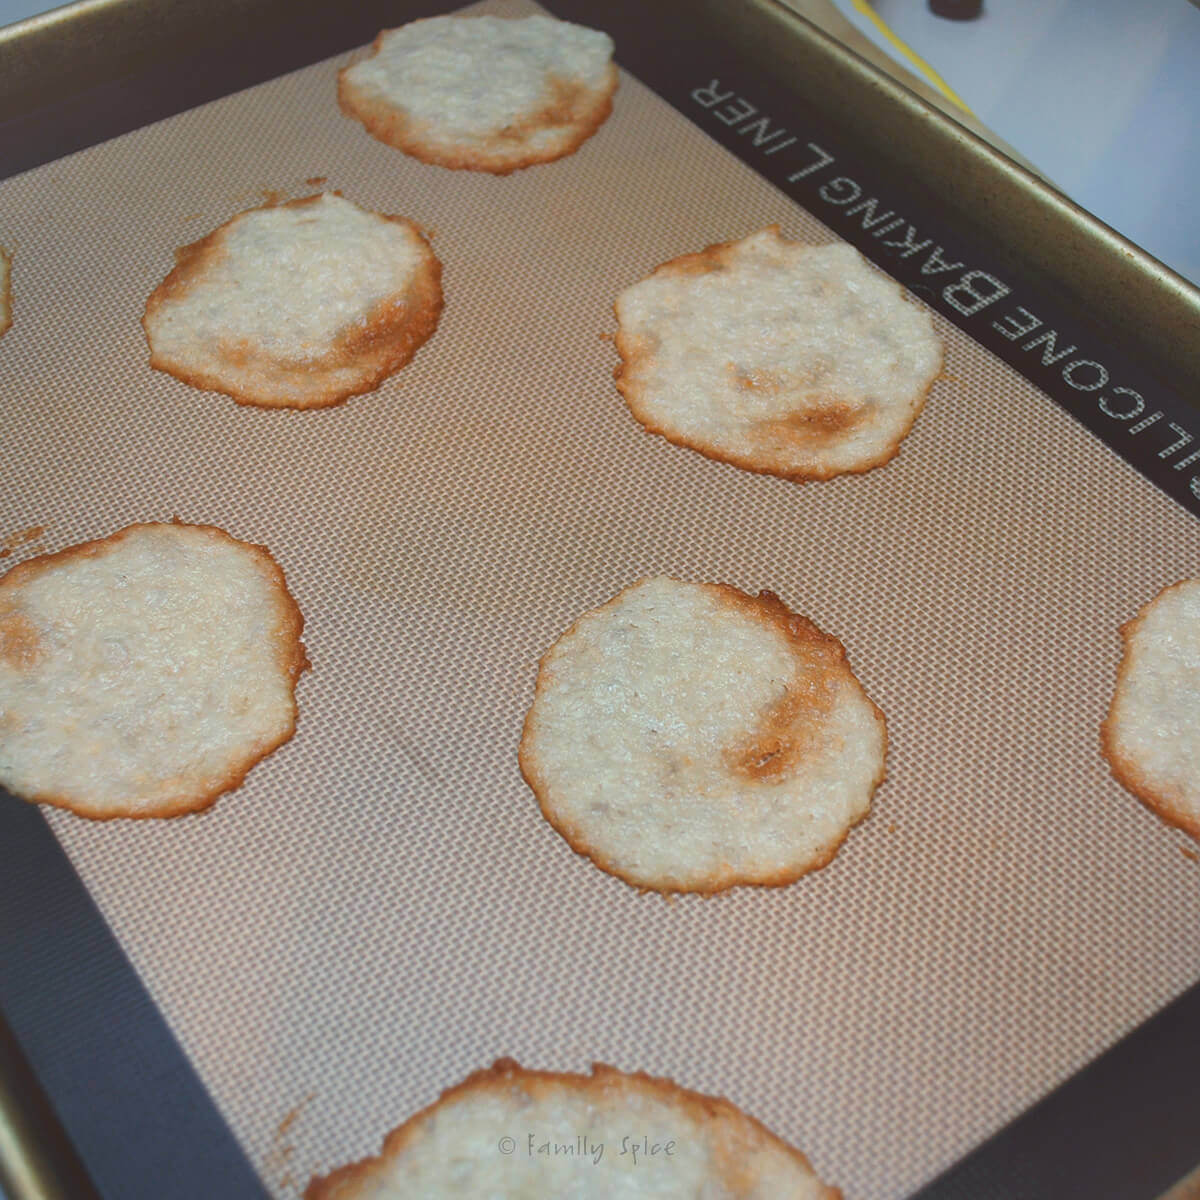 A baking sheet lined with silicone baking mat with freshly baked coconut thin cookies on it